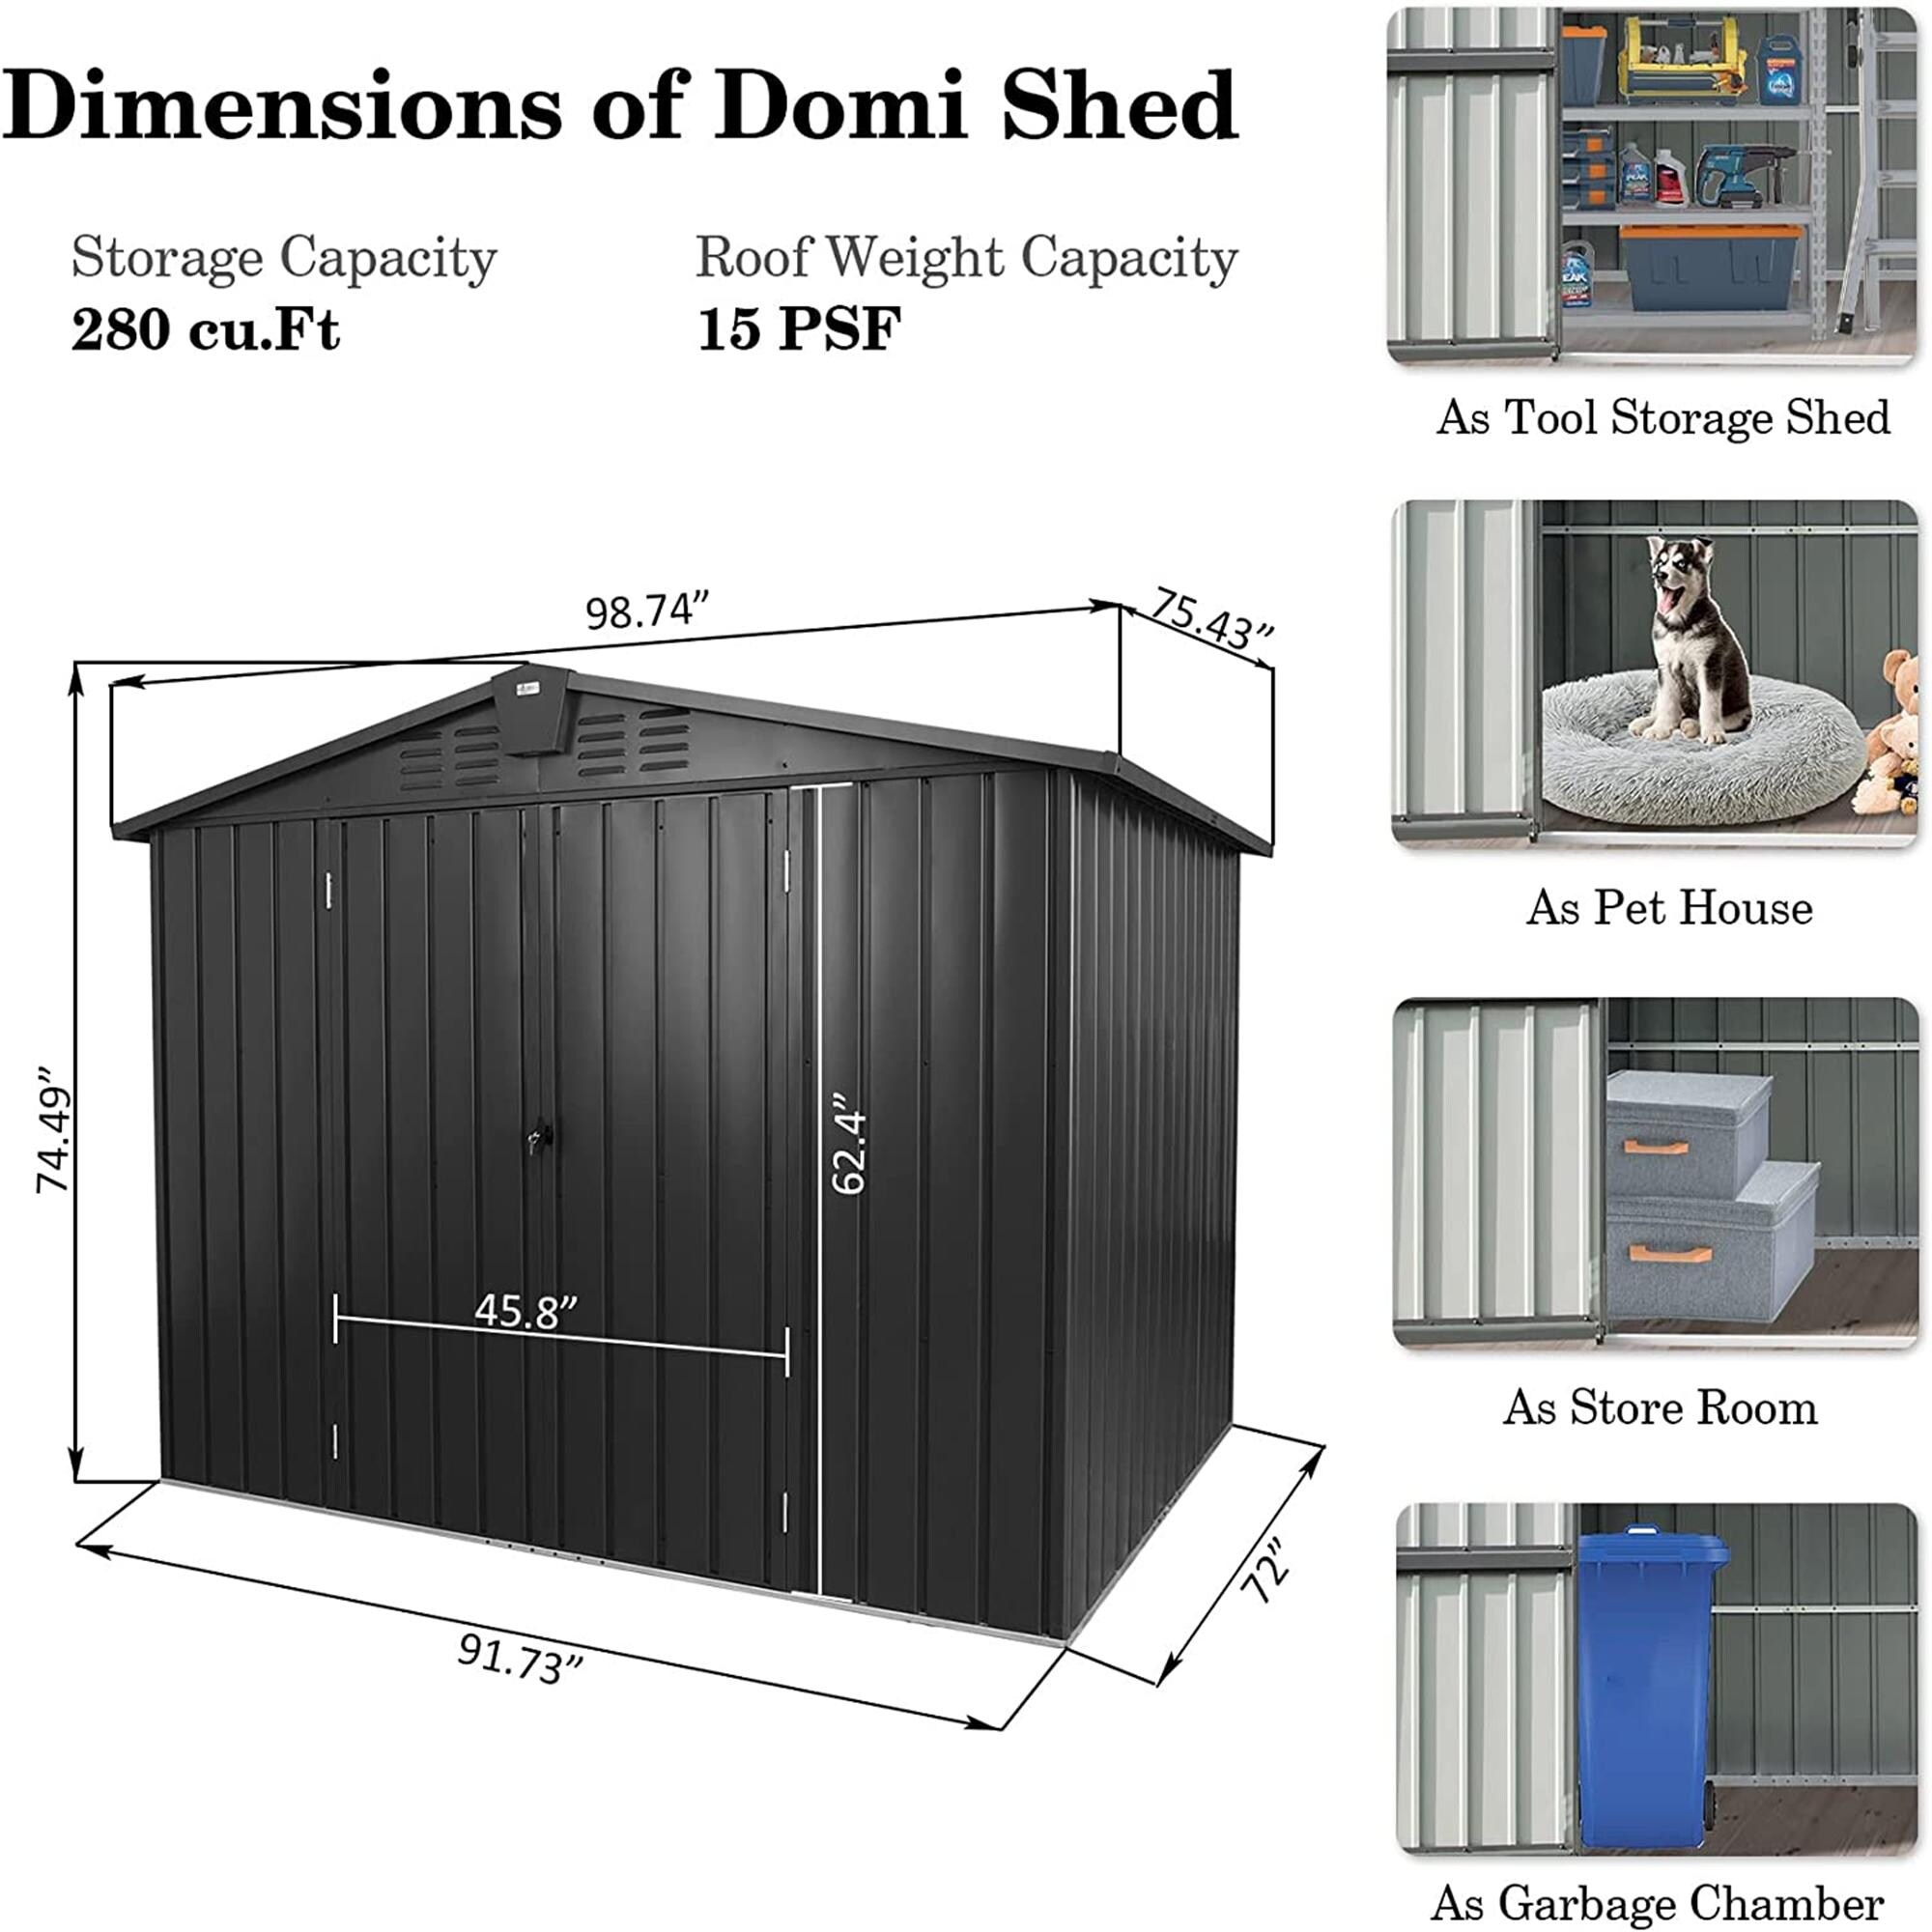 8.2'x 6.2' Outdoor Storage Shed, Garden Metal Tool Storage Shed with Lockable Door & Vents for Backyard,Black